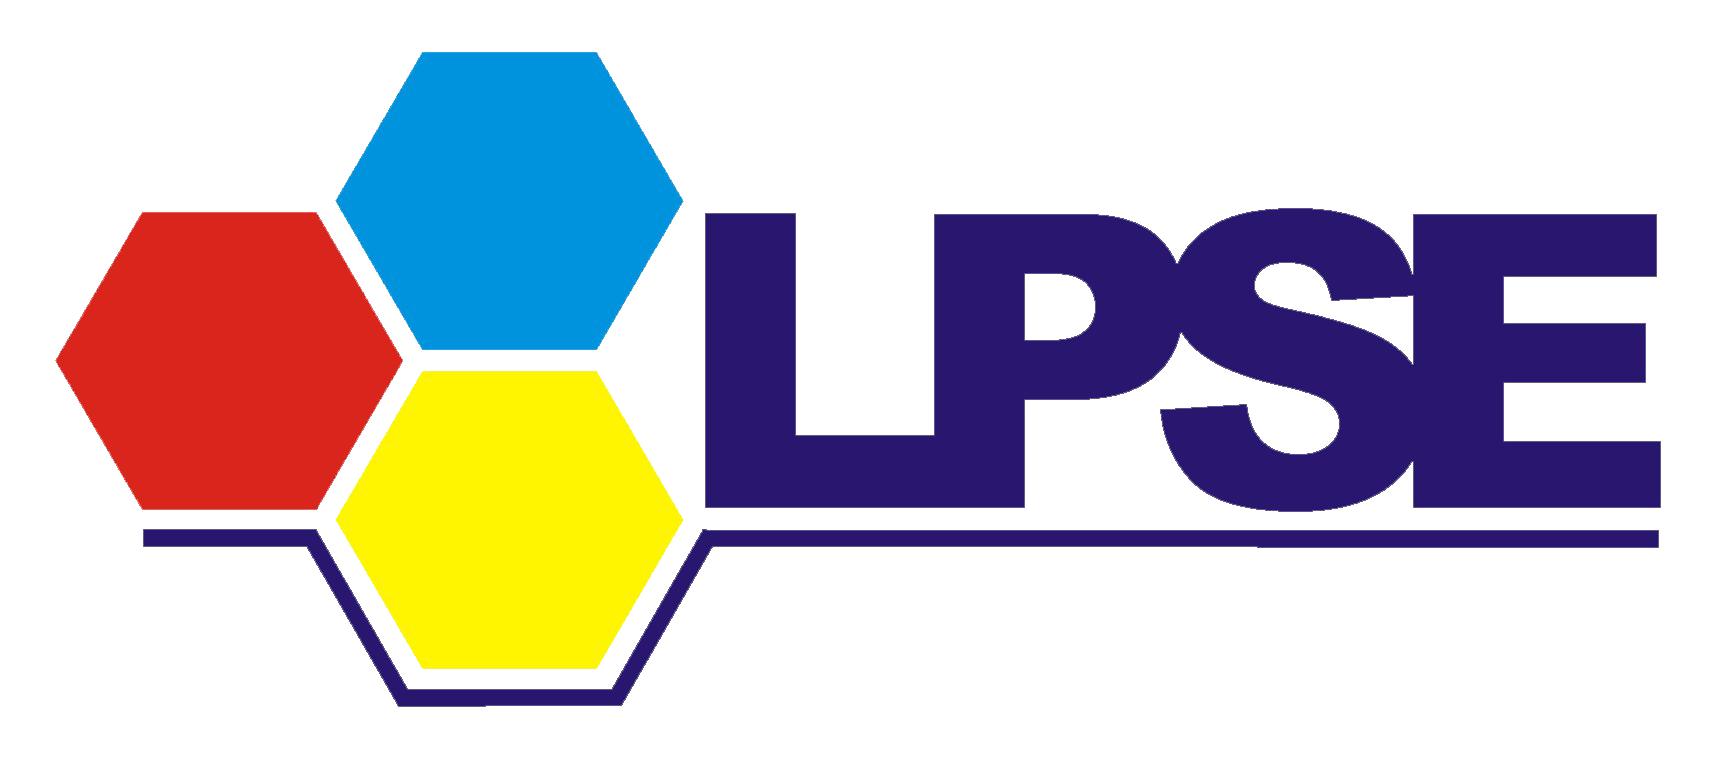 LPSE.png - 111.85 kB